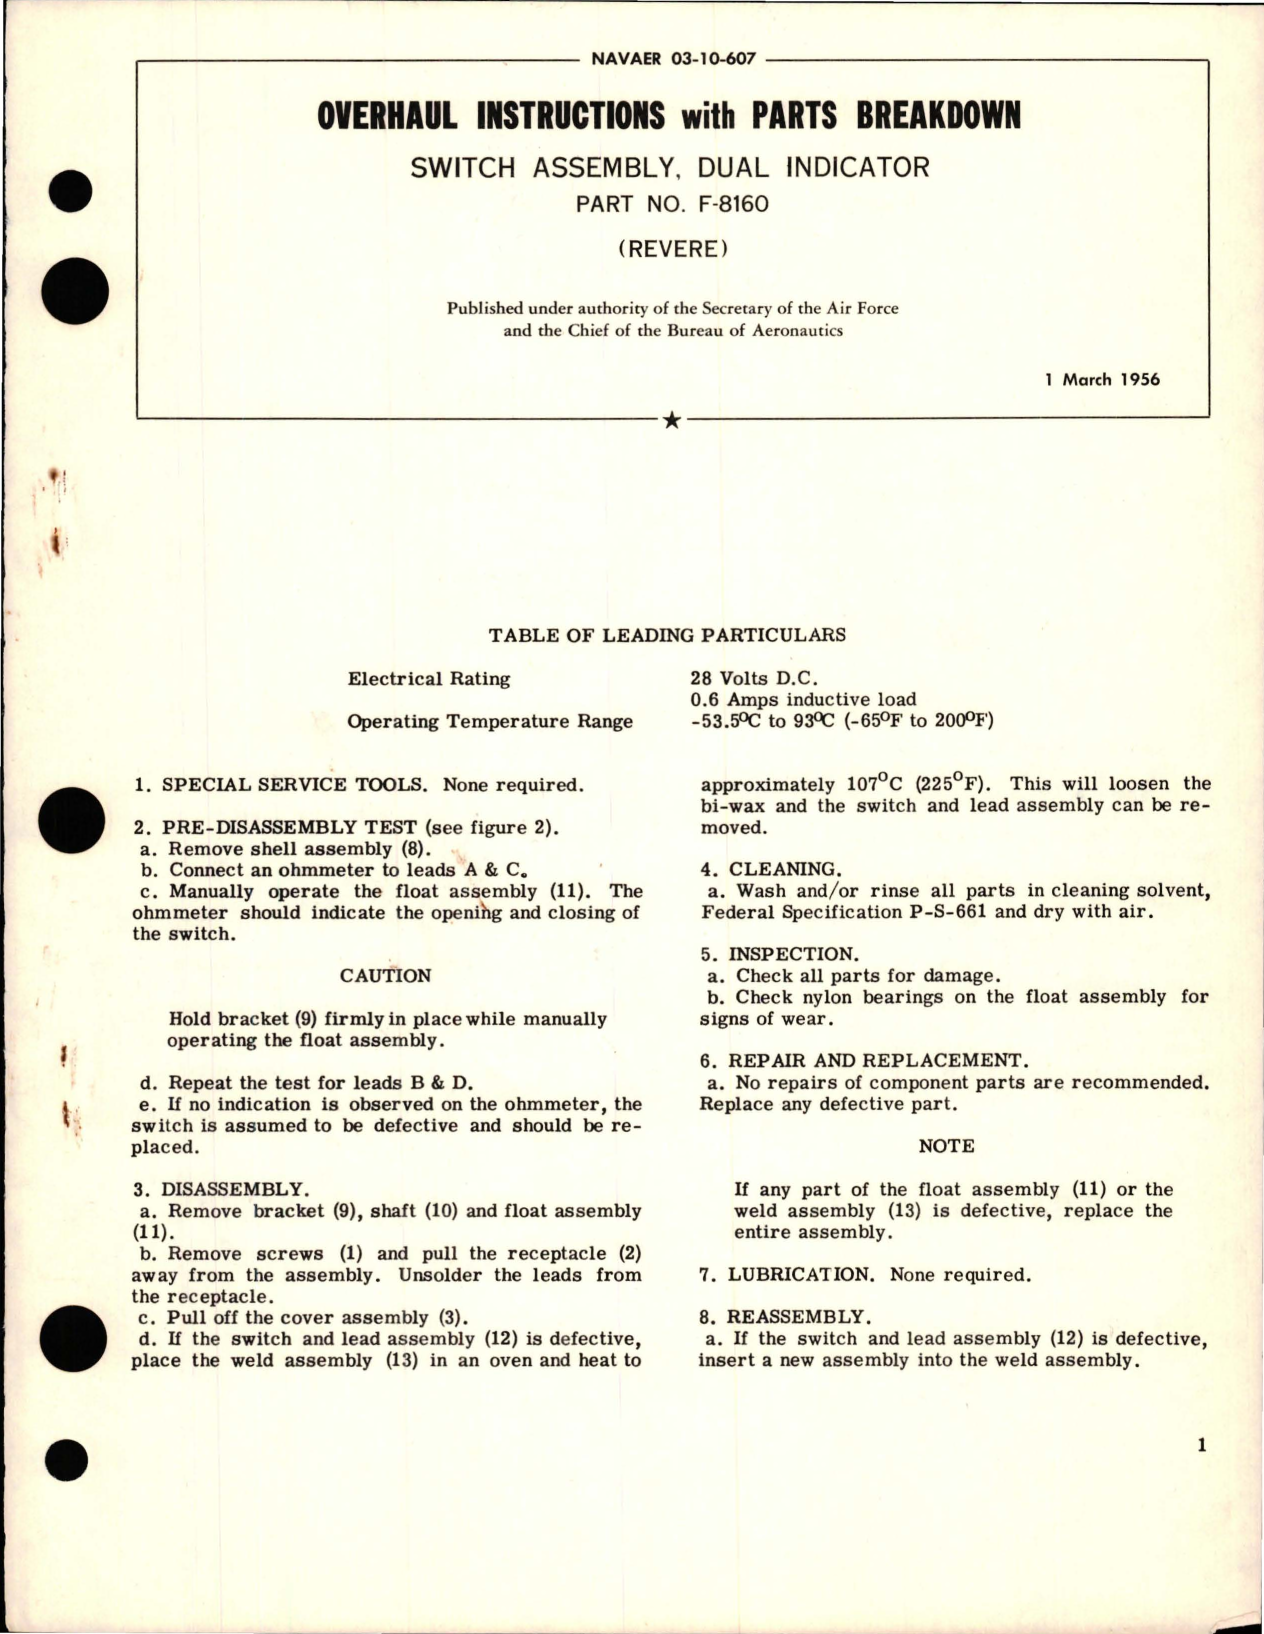 Sample page 1 from AirCorps Library document: Overhaul Instructions with Parts Breakdown for Dual Indicator Switch Assembly - Part F-8160 